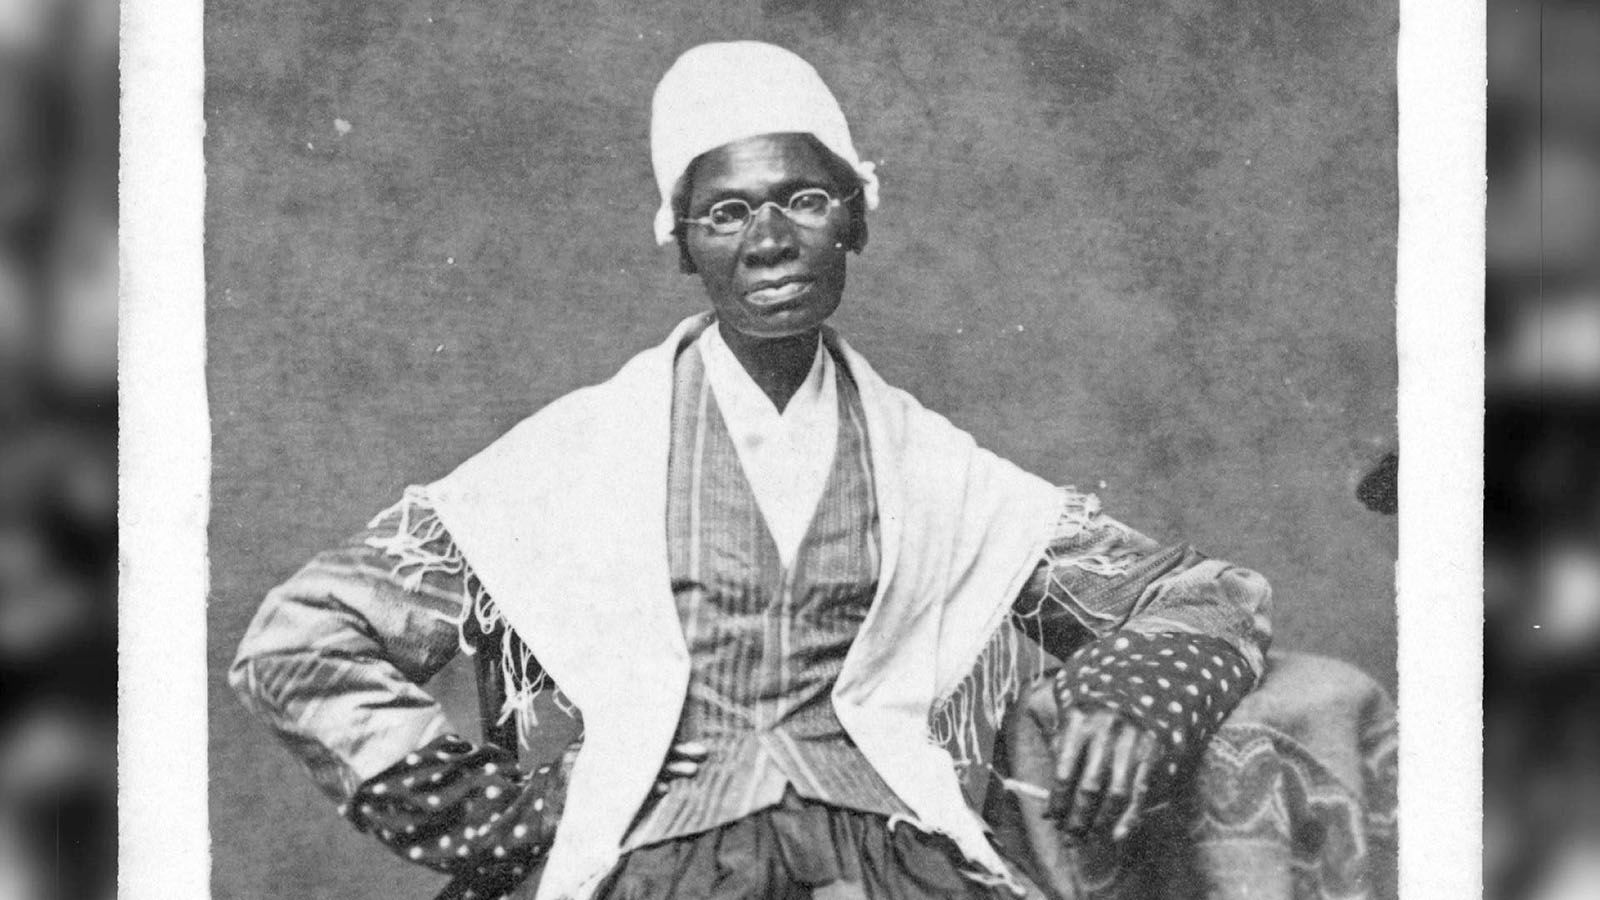 Sojourner Truth's "Ain't I a Woman" is featured in ACPL's Black History Month Exhibit.